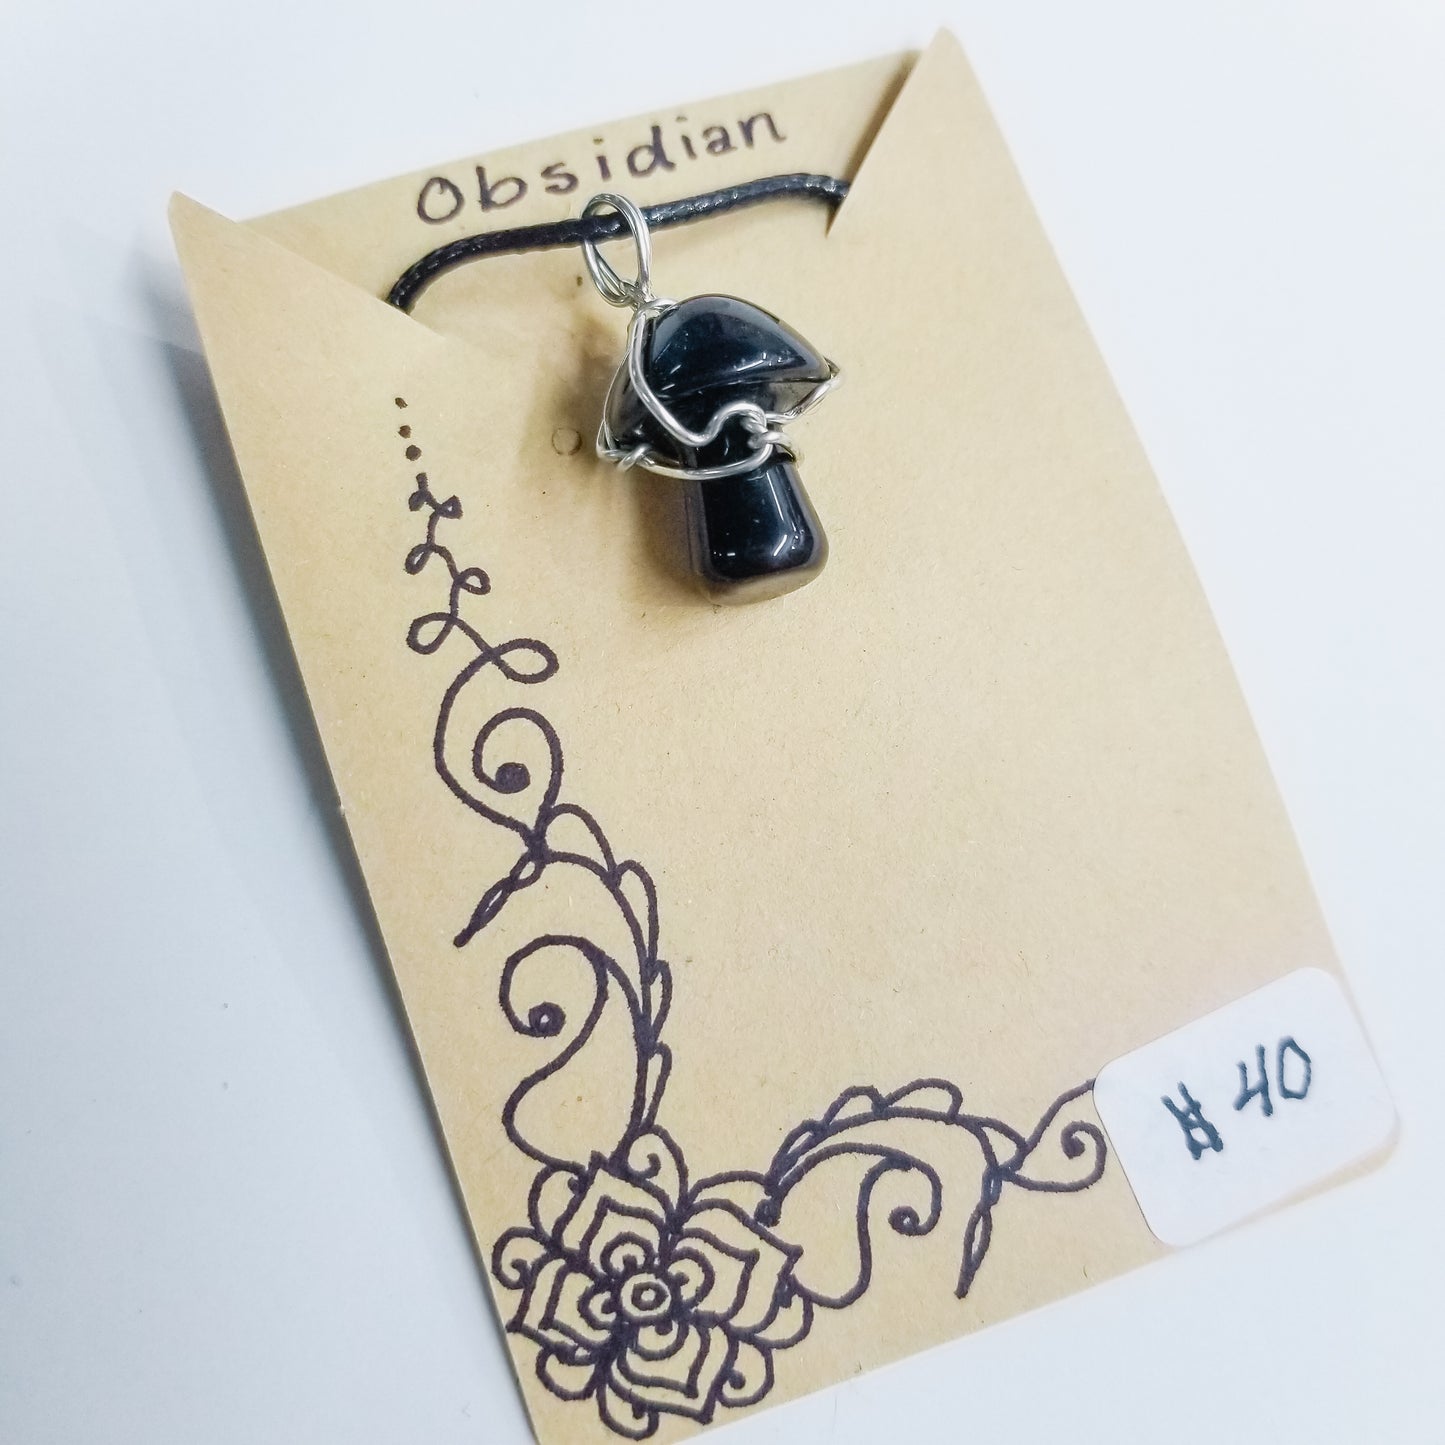 Obsidian Mushi Handwrapped Necklace